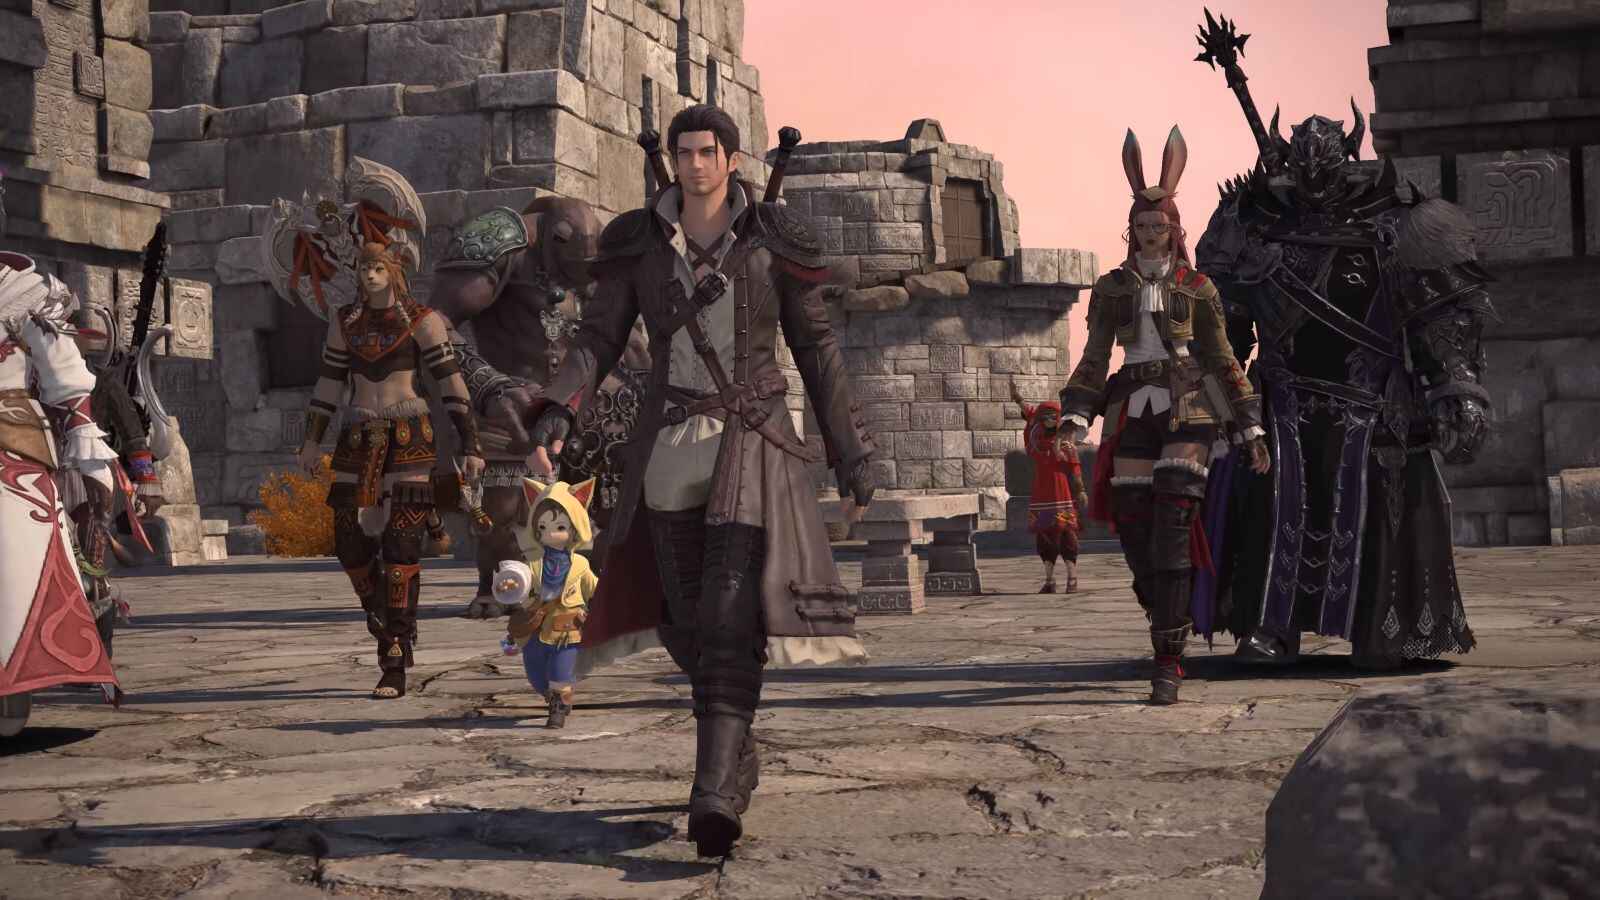 Final Fantasy 14’s European servers battered for 5 days in worst DDoS spree since 2018